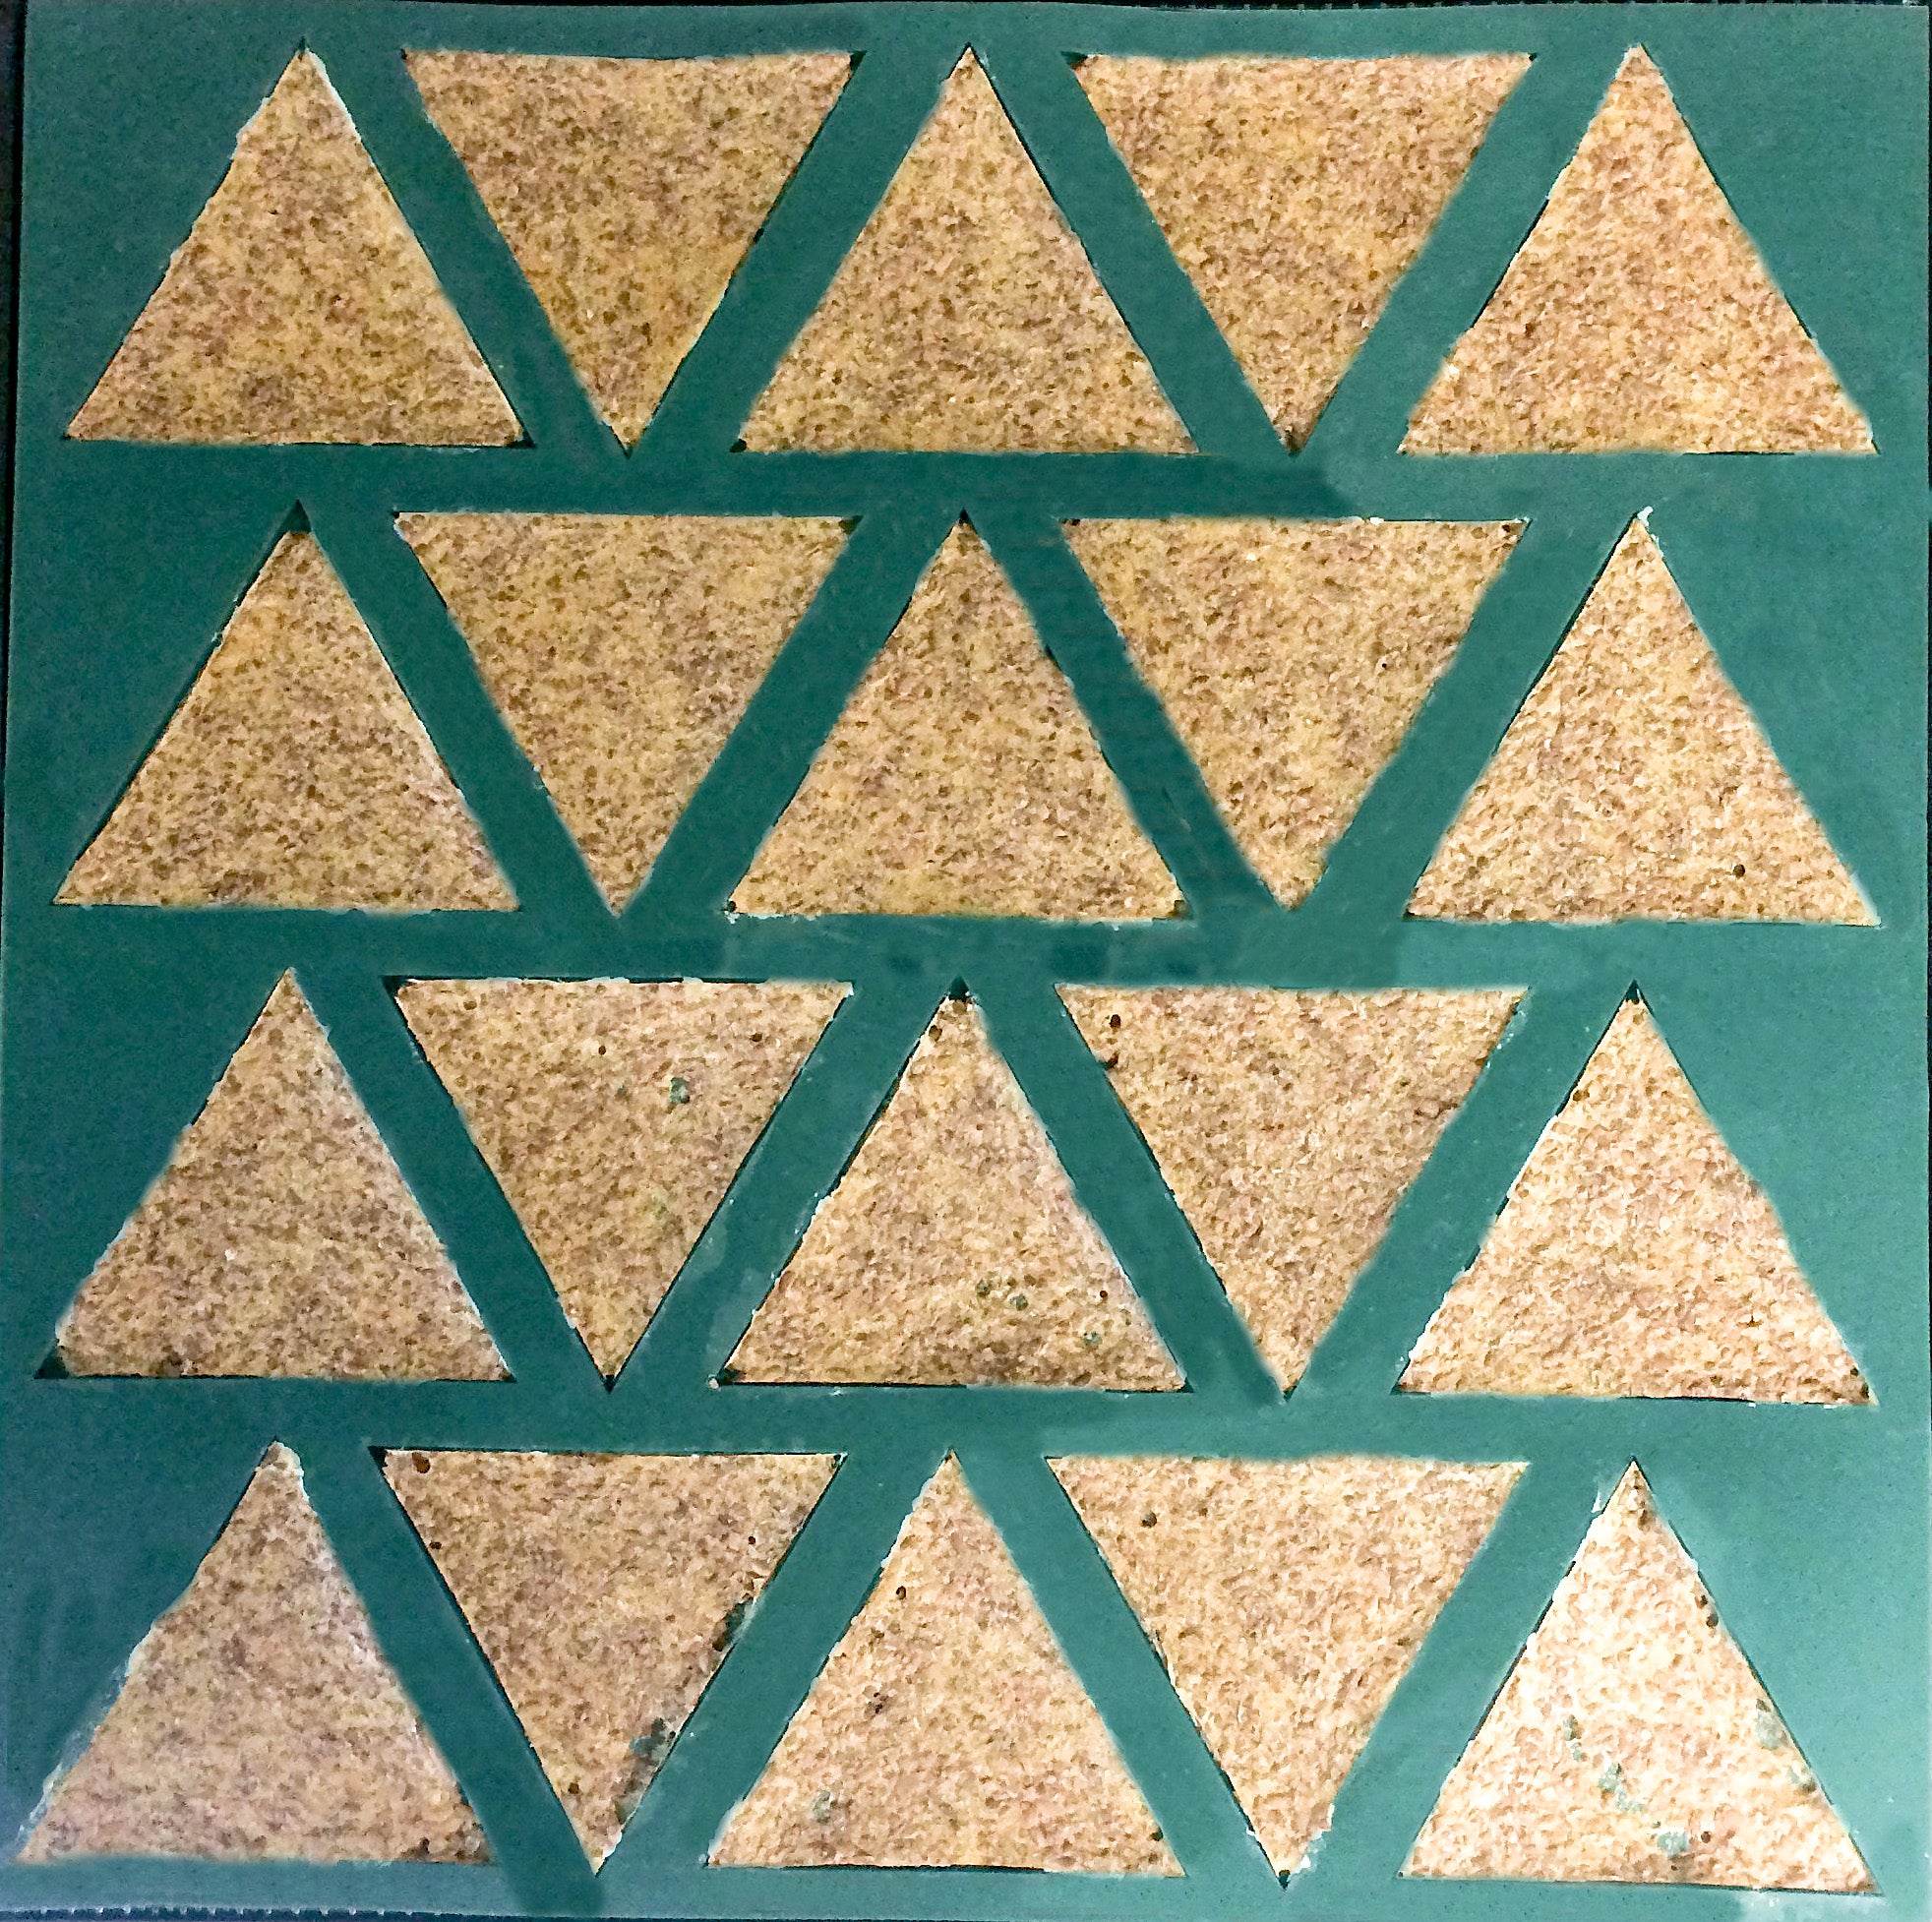 Dehydrator Triangle Chip Mold Silicone Mat for Excalibur Dehydrators 14" x 14"